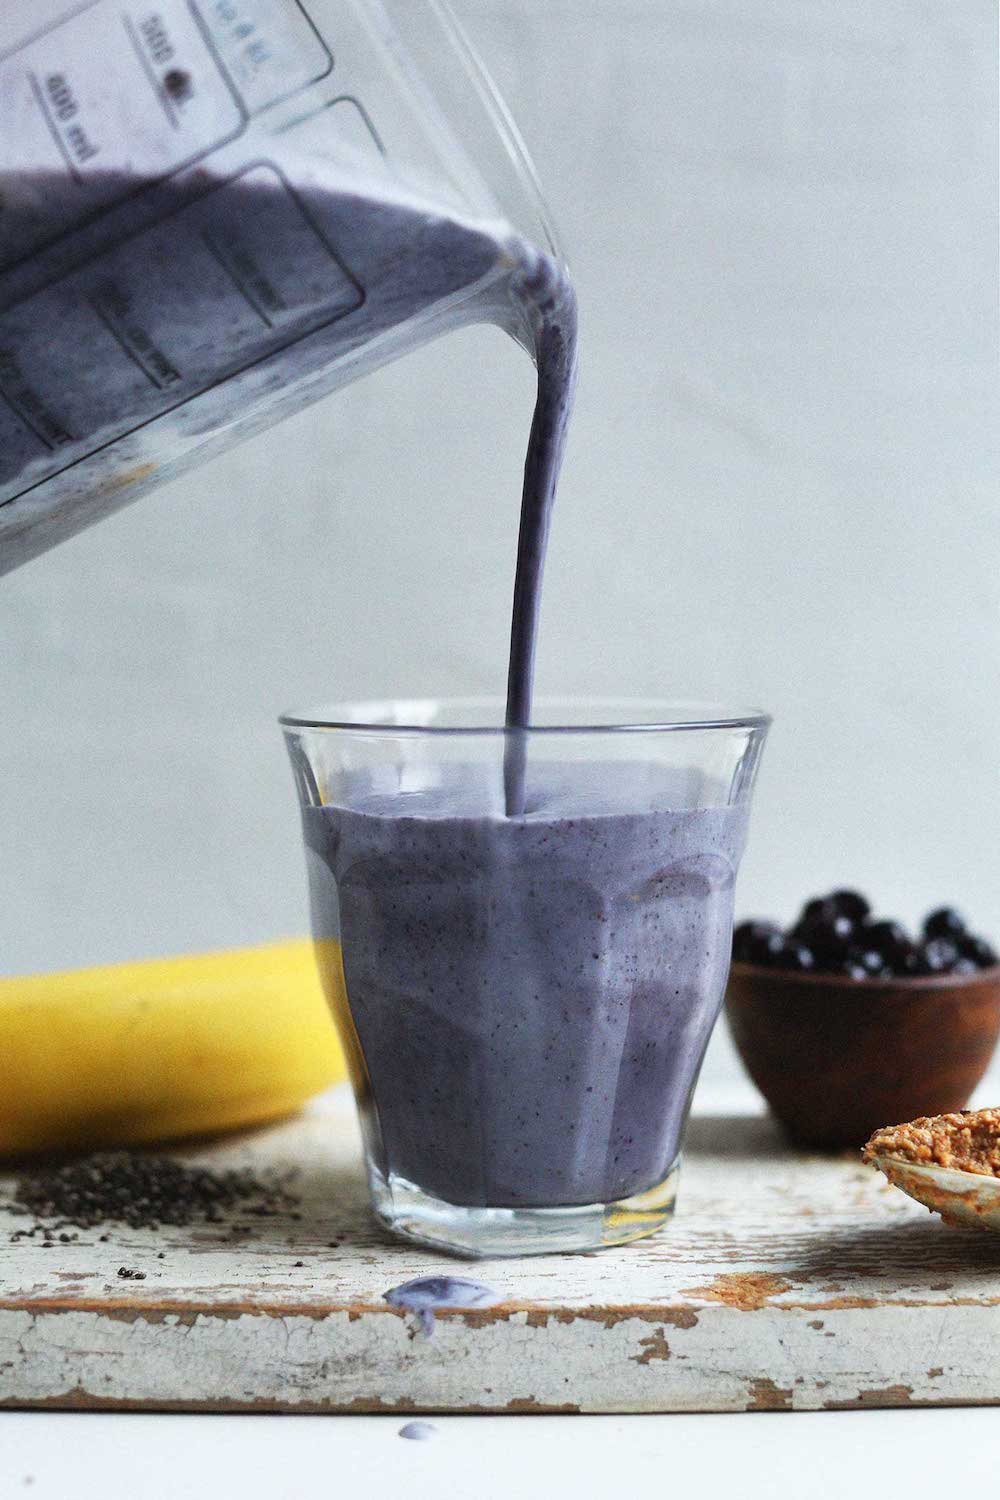 CREAMY-delicious-Almond-Butter-Blueberry-Smoothei-with-Chia-and-Flax.-Healthy-naturally-sweet-NUTRIENT-PACKED-vegan-glutenfree-smoothie-plantbased-breakfast-blueberry